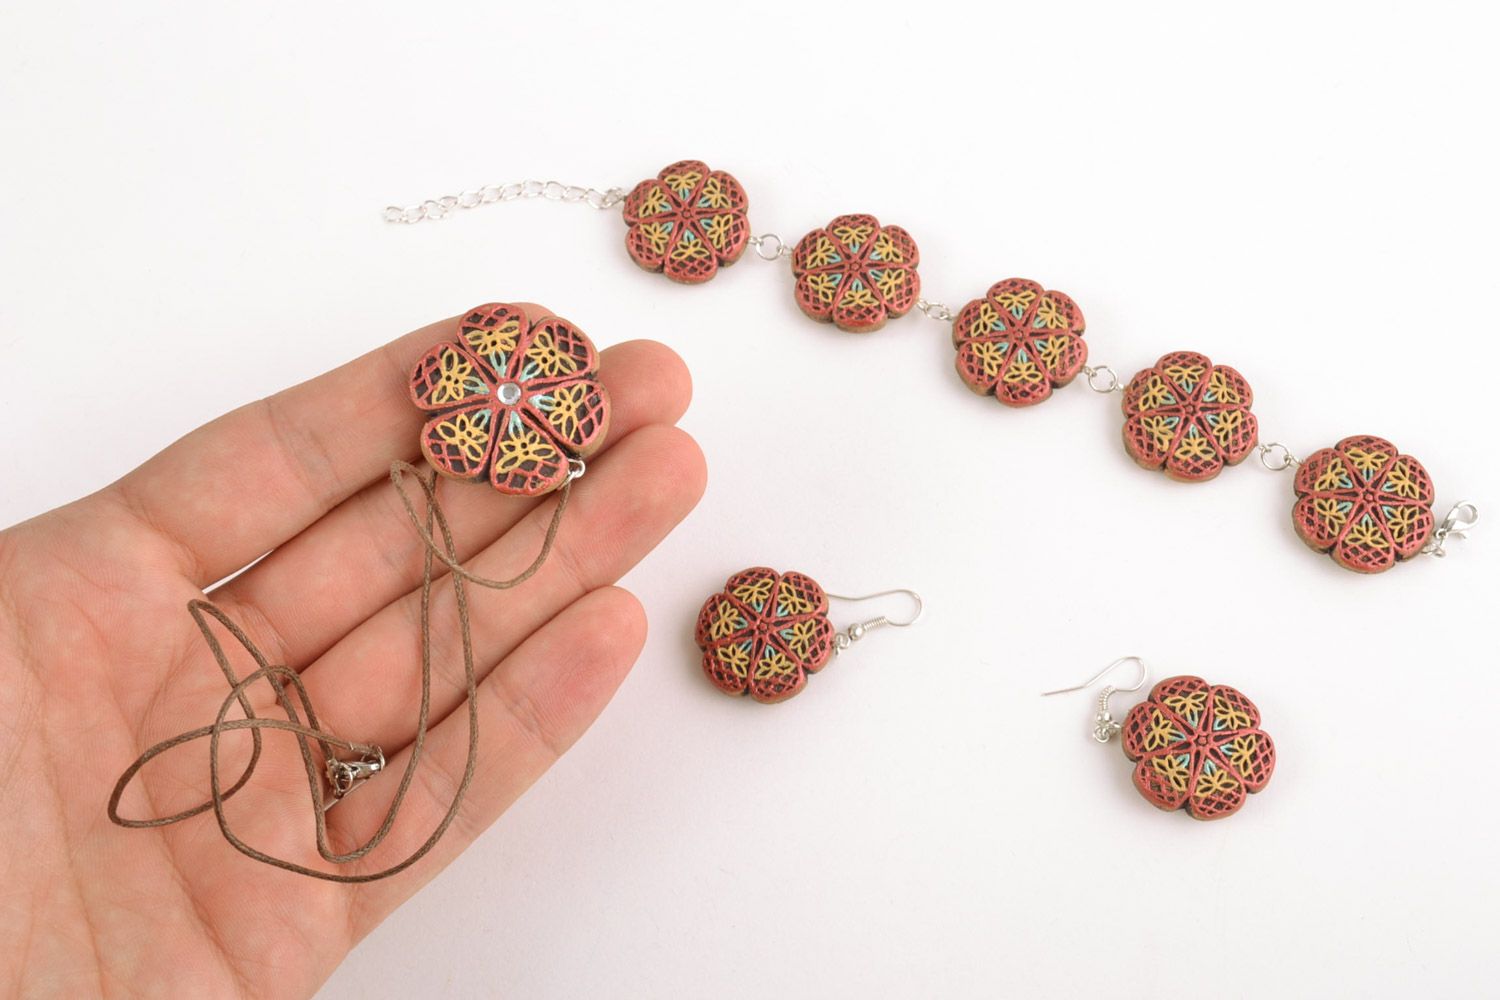 Handmade painted clay jewelry set 3 items patterned earrings bracelet and pendant photo 2